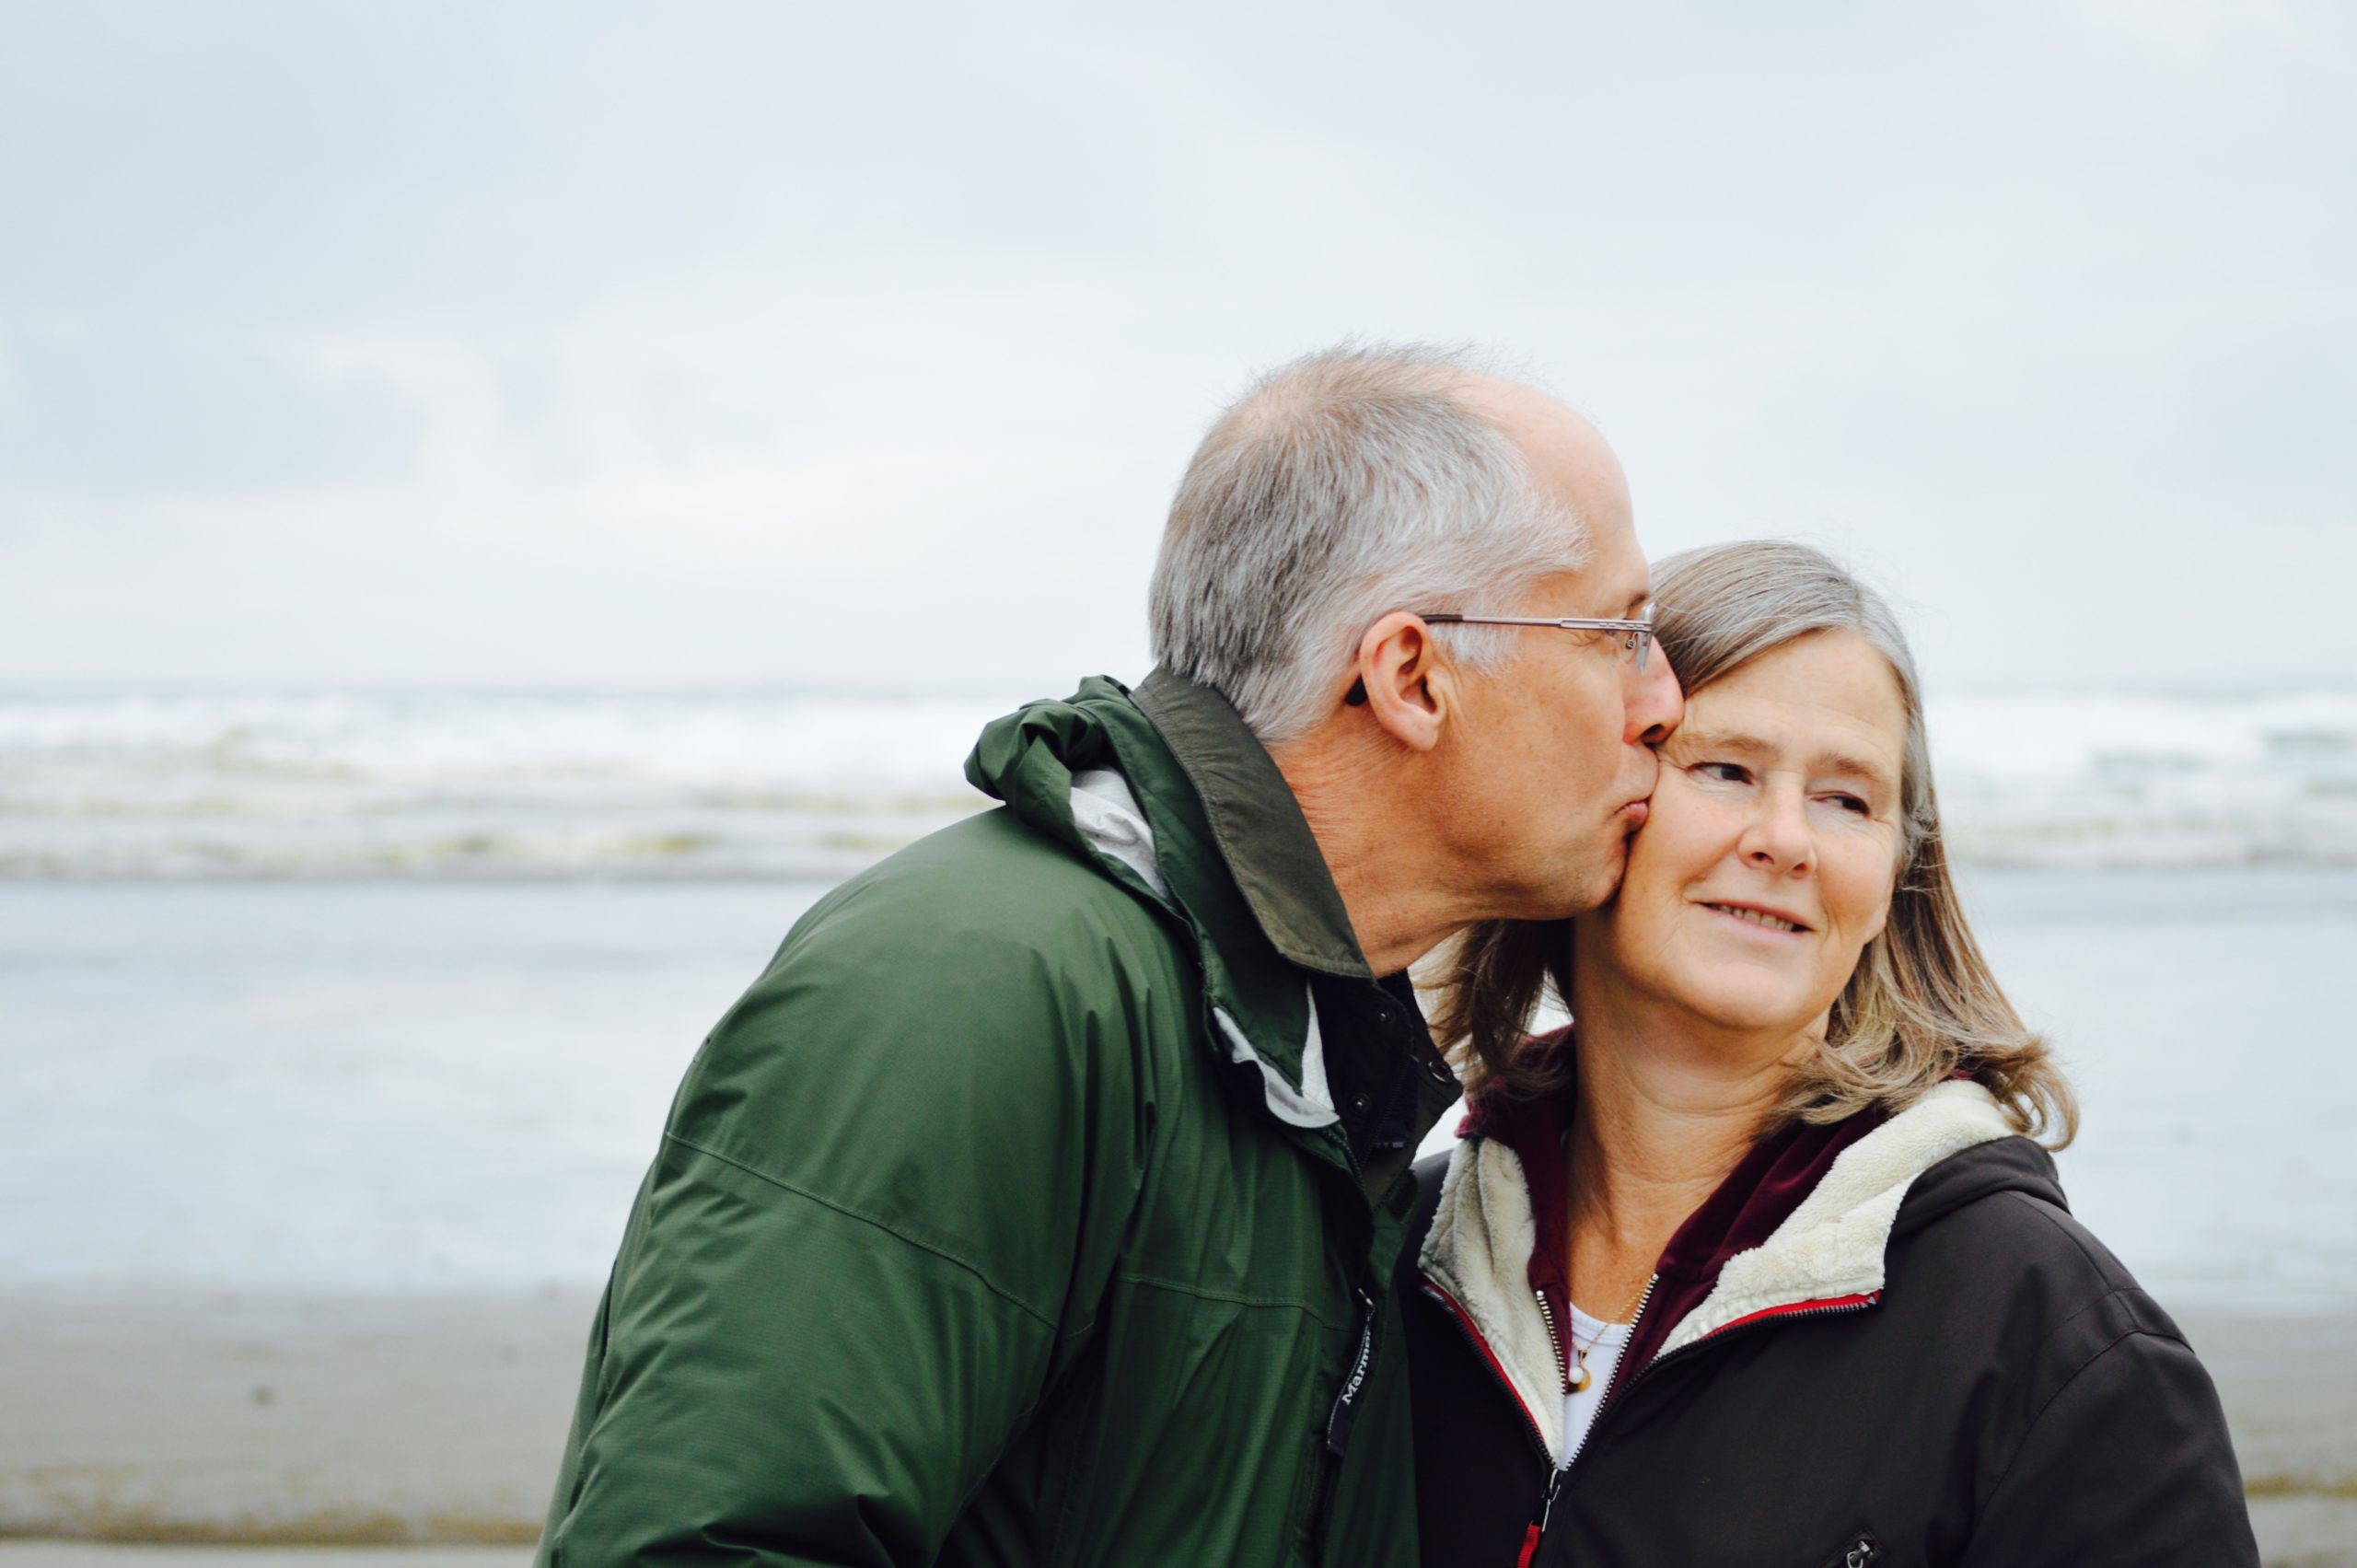 Senior couple walking on the beach - People generally have a longer life expectancy these days - here are 5 ways you can promote your health as a senior during your golden years.